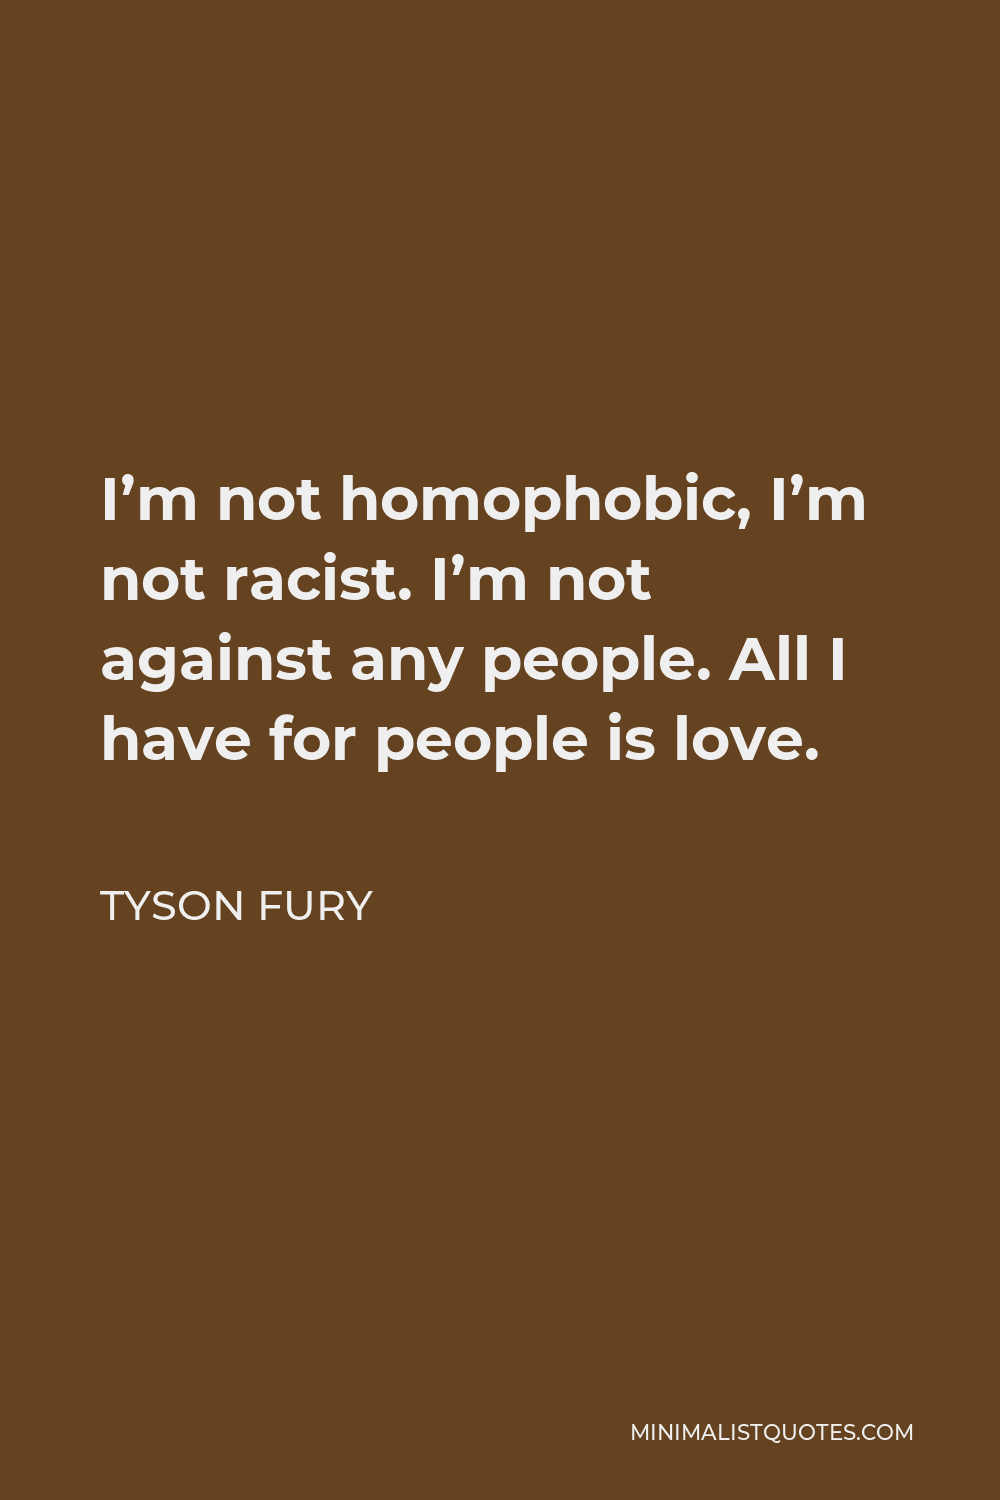 Tyson Fury Quote - I’m not homophobic, I’m not racist. I’m not against any people. All I have for people is love.